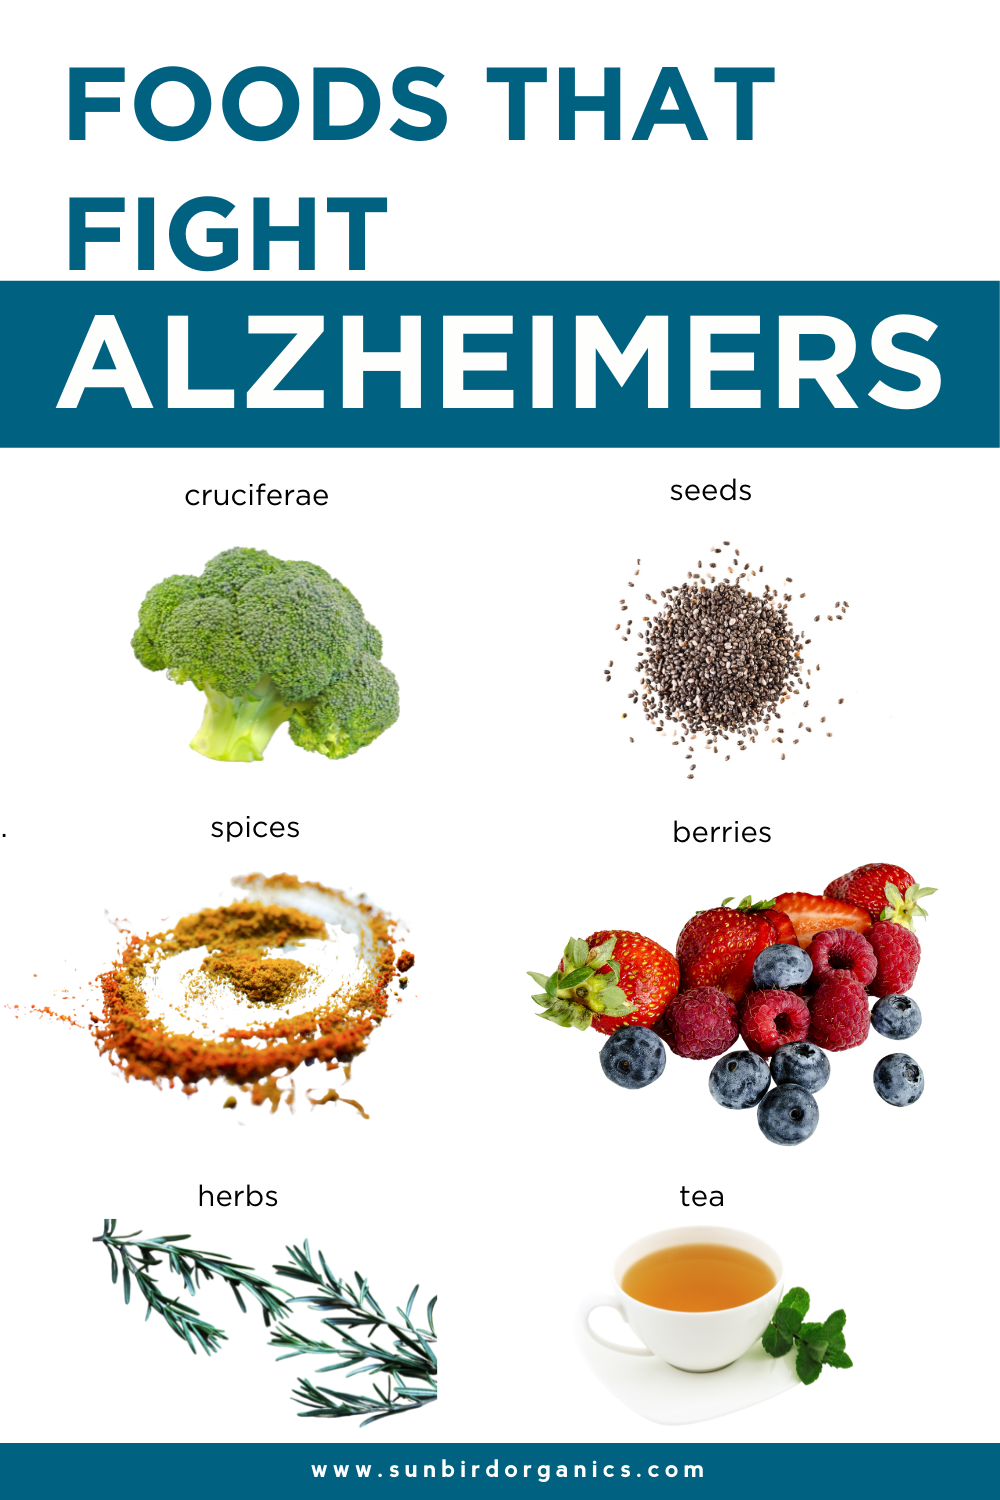 Foods that fight alzheimers